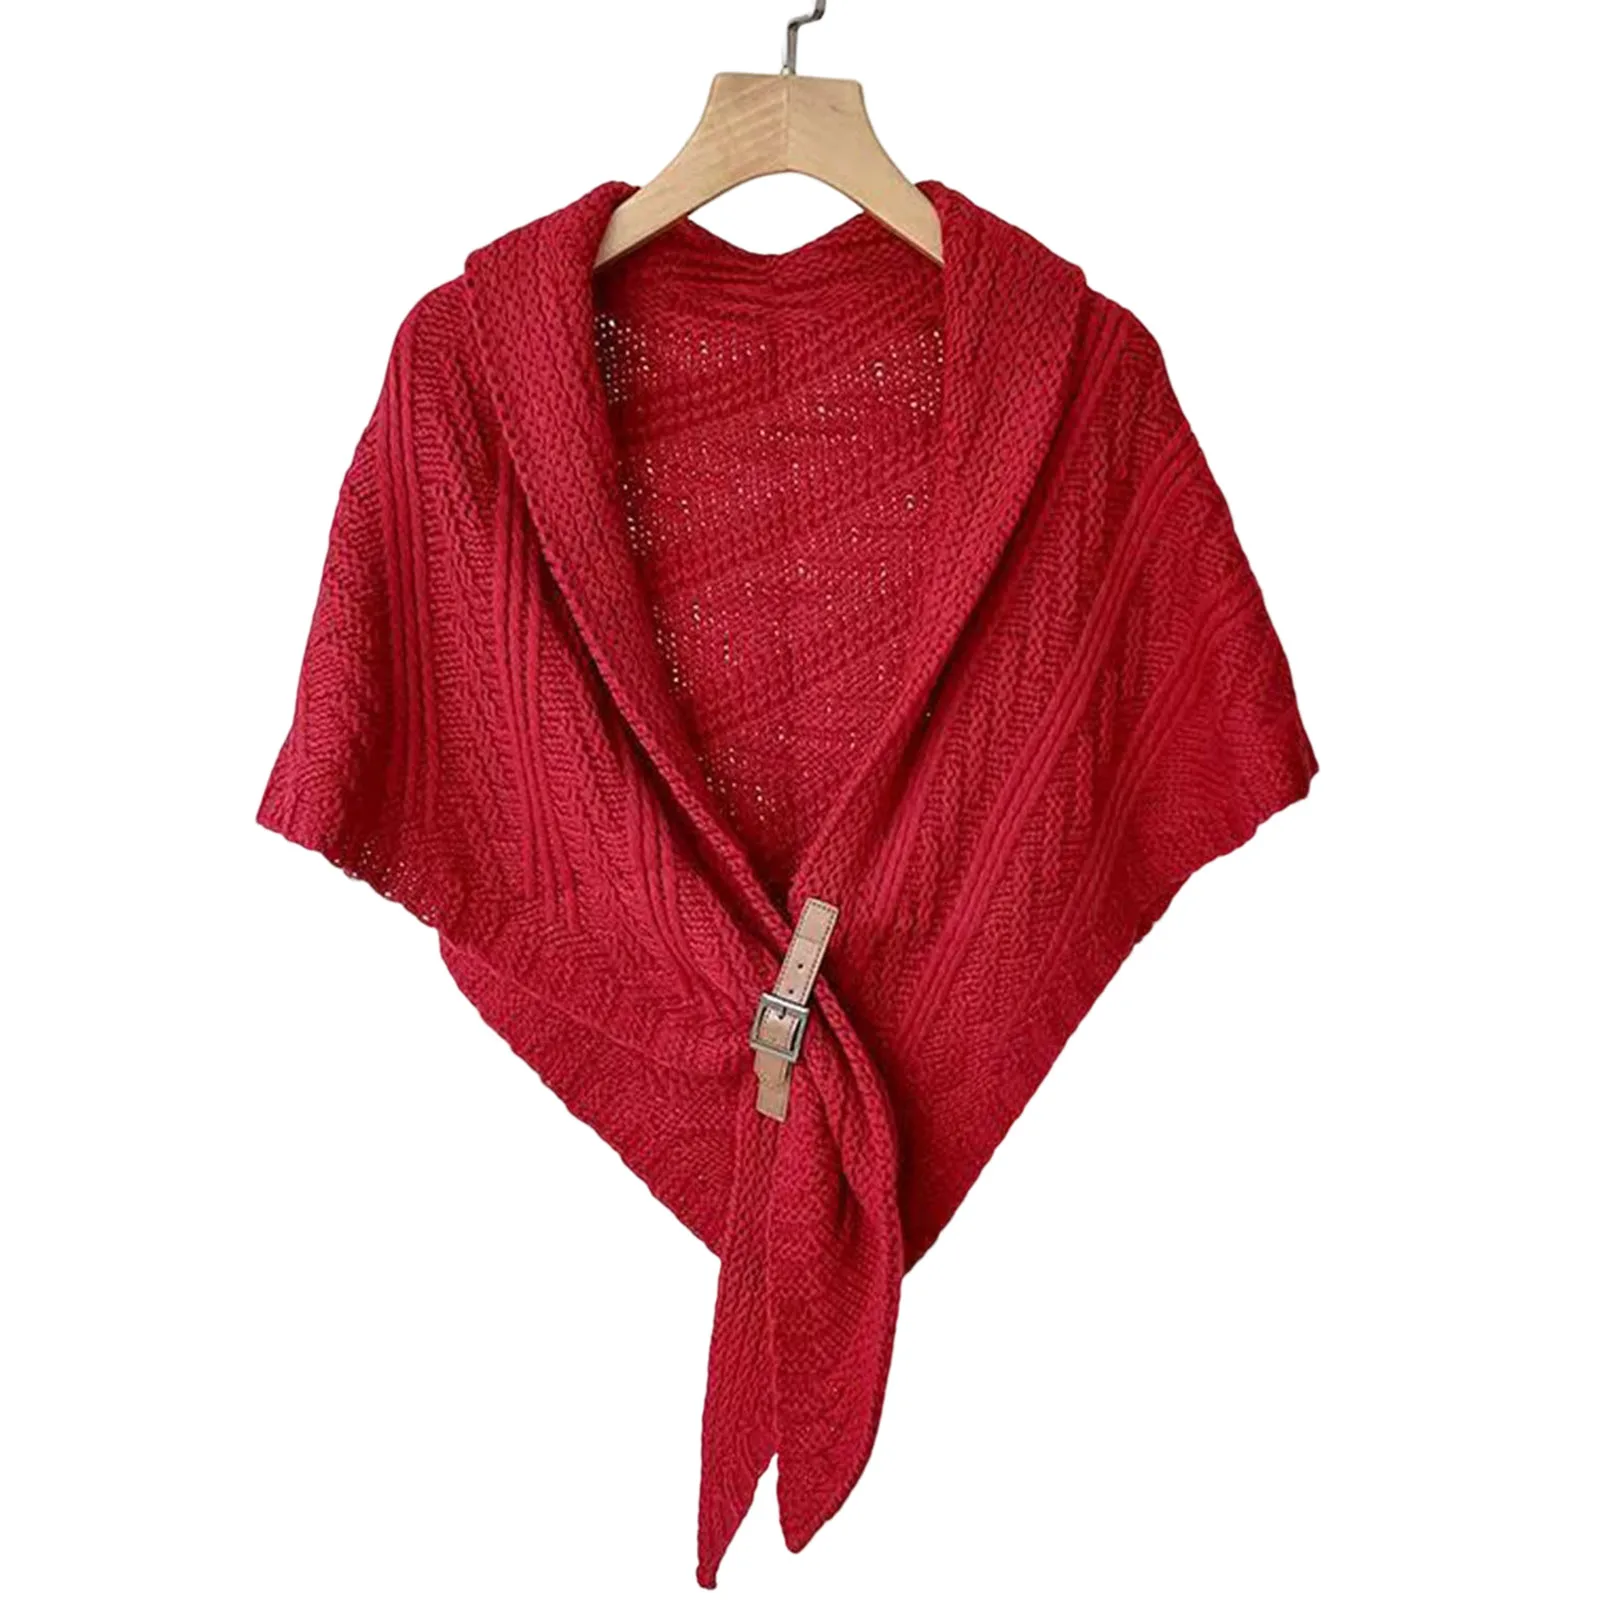 

Women's Shawls and Wraps Knitted Shrug Sweater with PU Tie Belt Triangle Design Gift for Girls or Ladies Newly